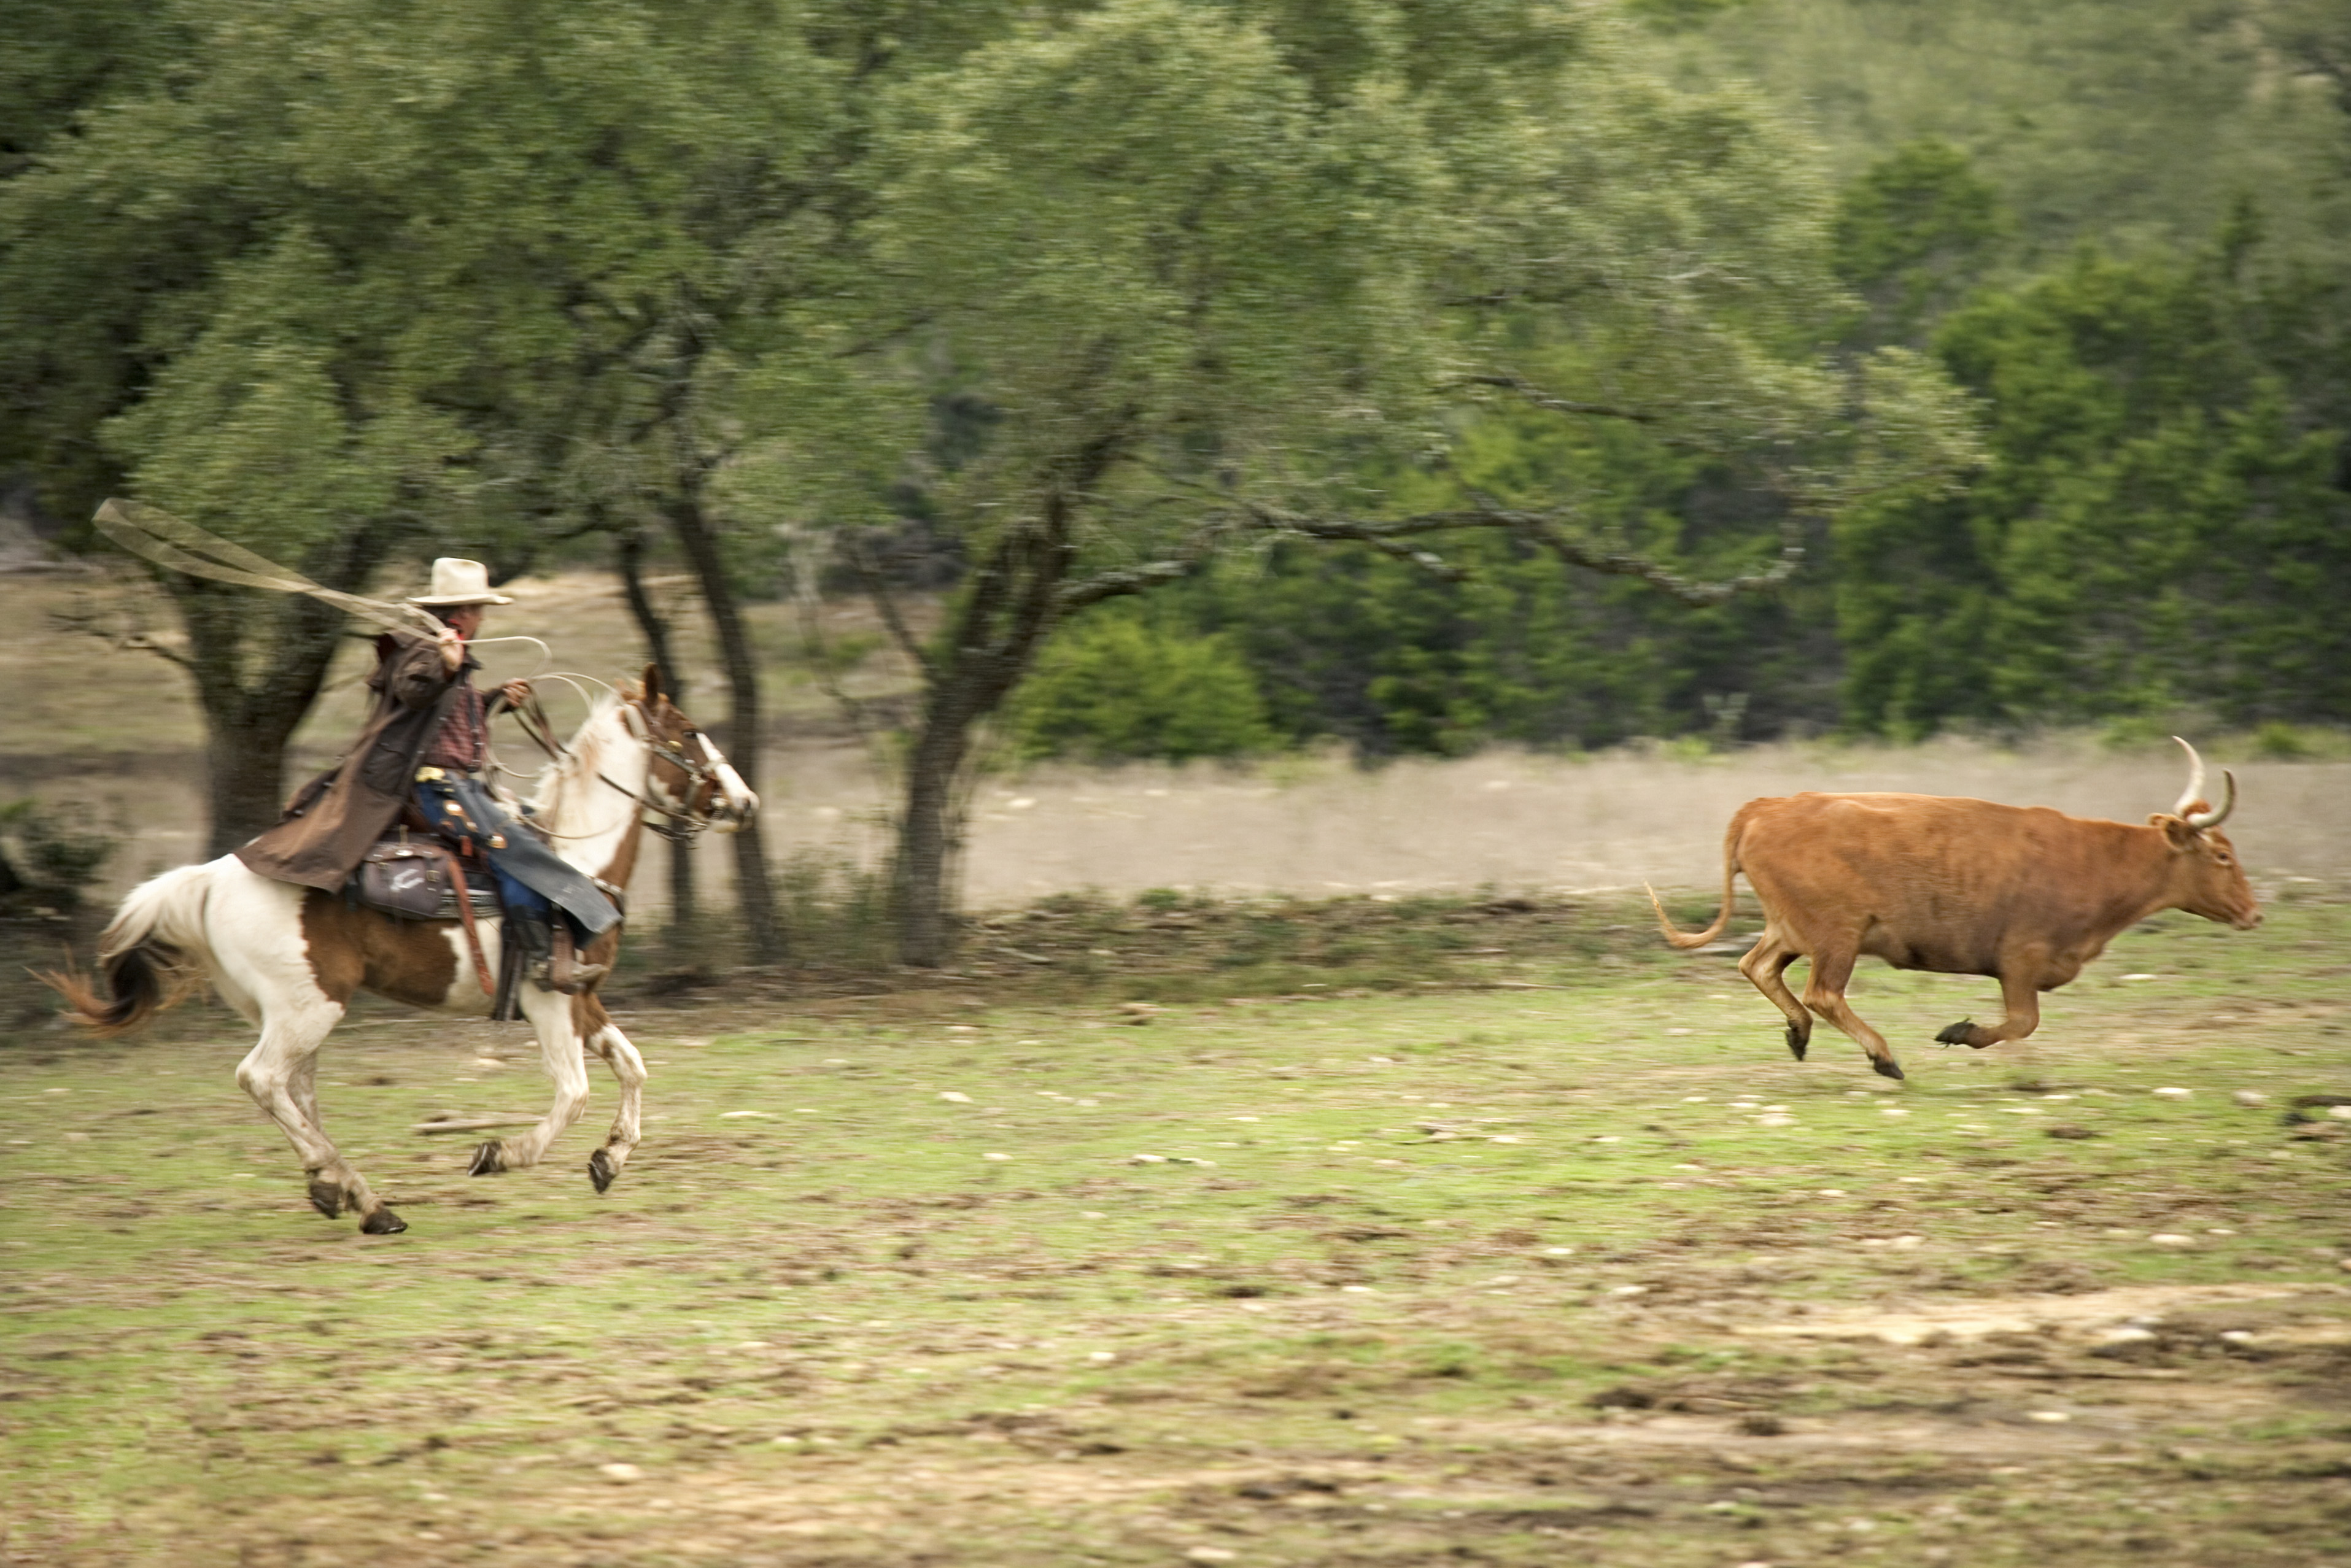 Man on horse chasing a bull on a grassy meadow.